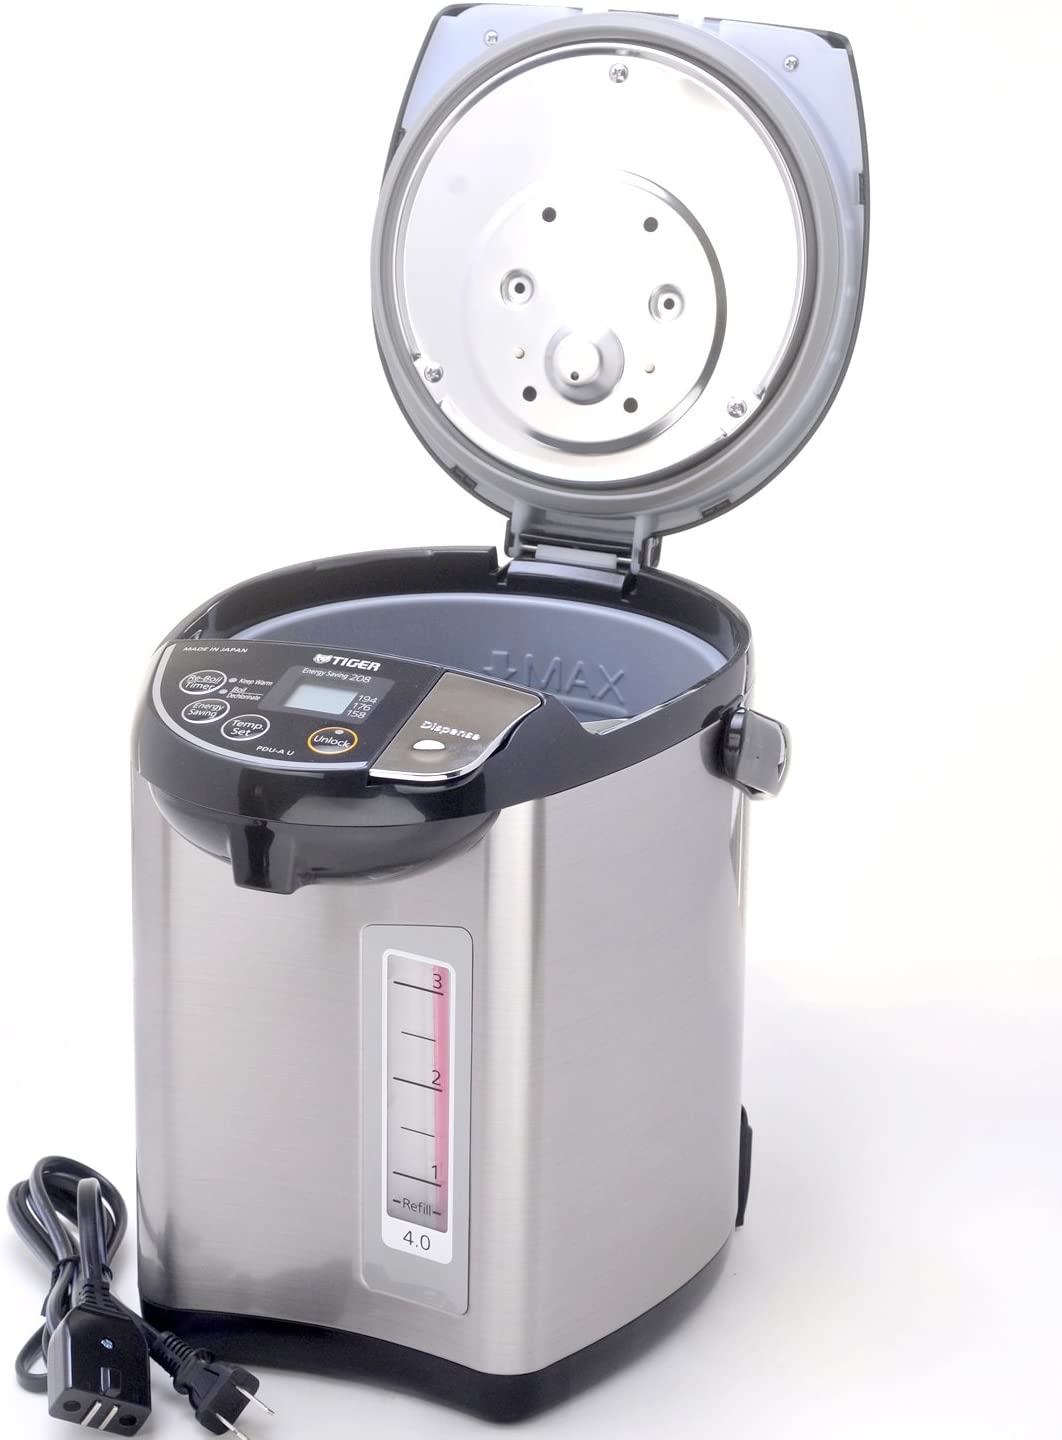 Tiger 4.0-Liter Electric Water Boiler and Warmer